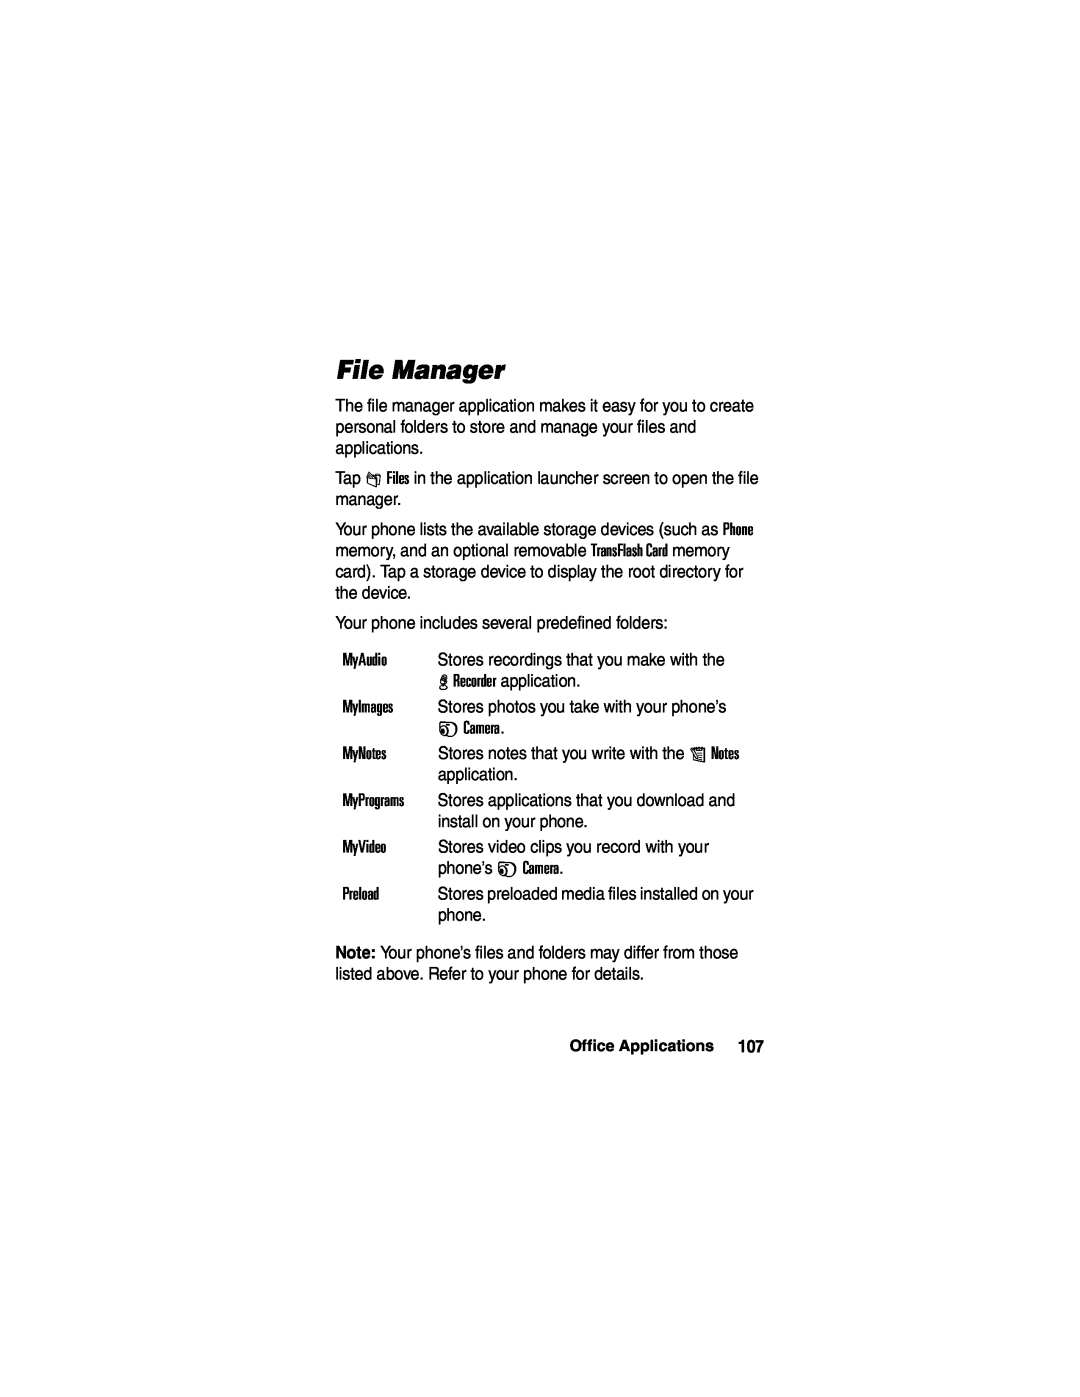 Motorola A780 manual File Manager, MyAudio, MyImages, F Camera, MyNotes, MyVideo, Preload 